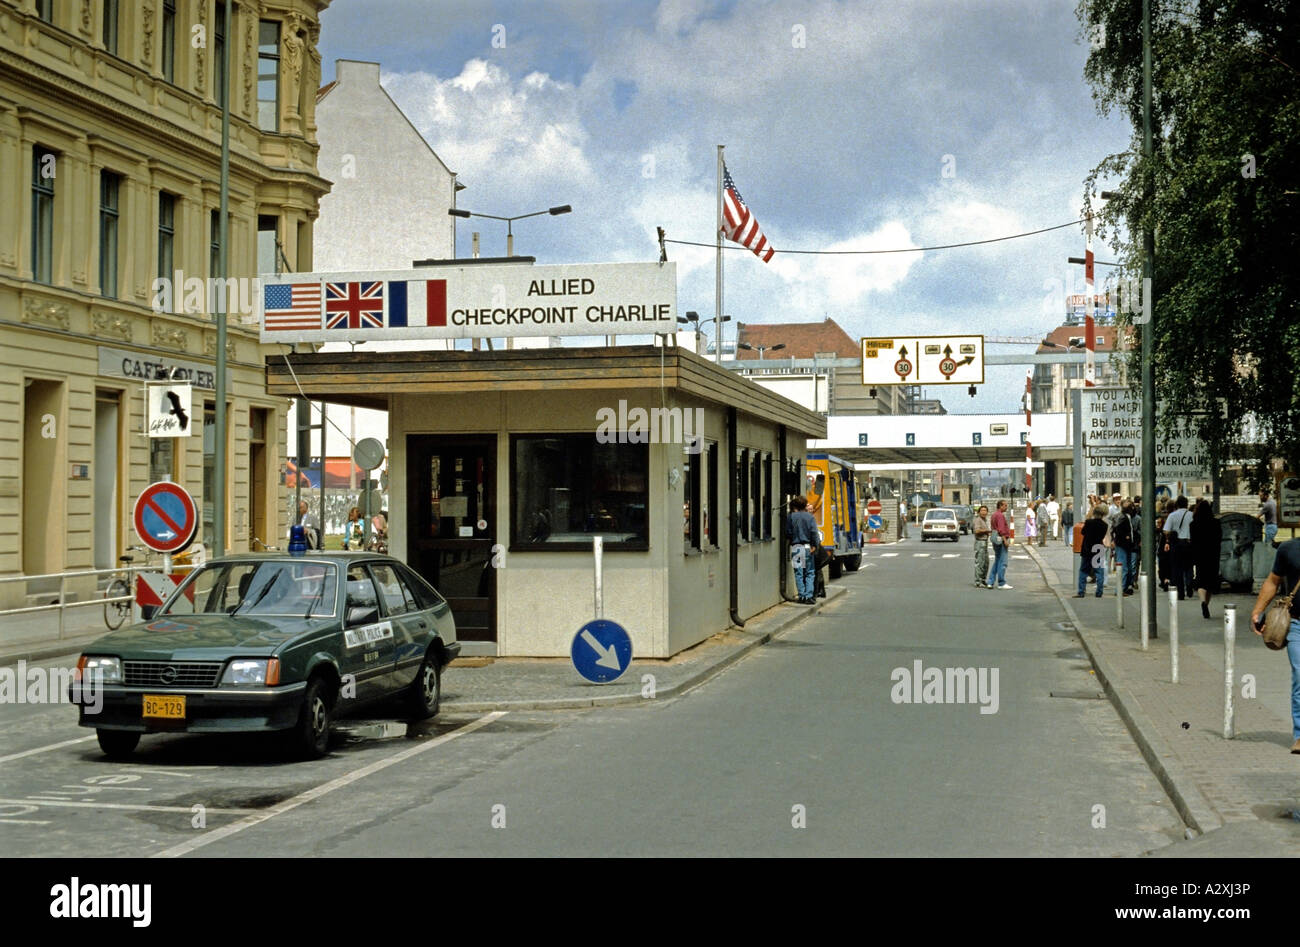 Allied Checkpoint Charlie, c. 1990, Berlin, Germany Stock Photo